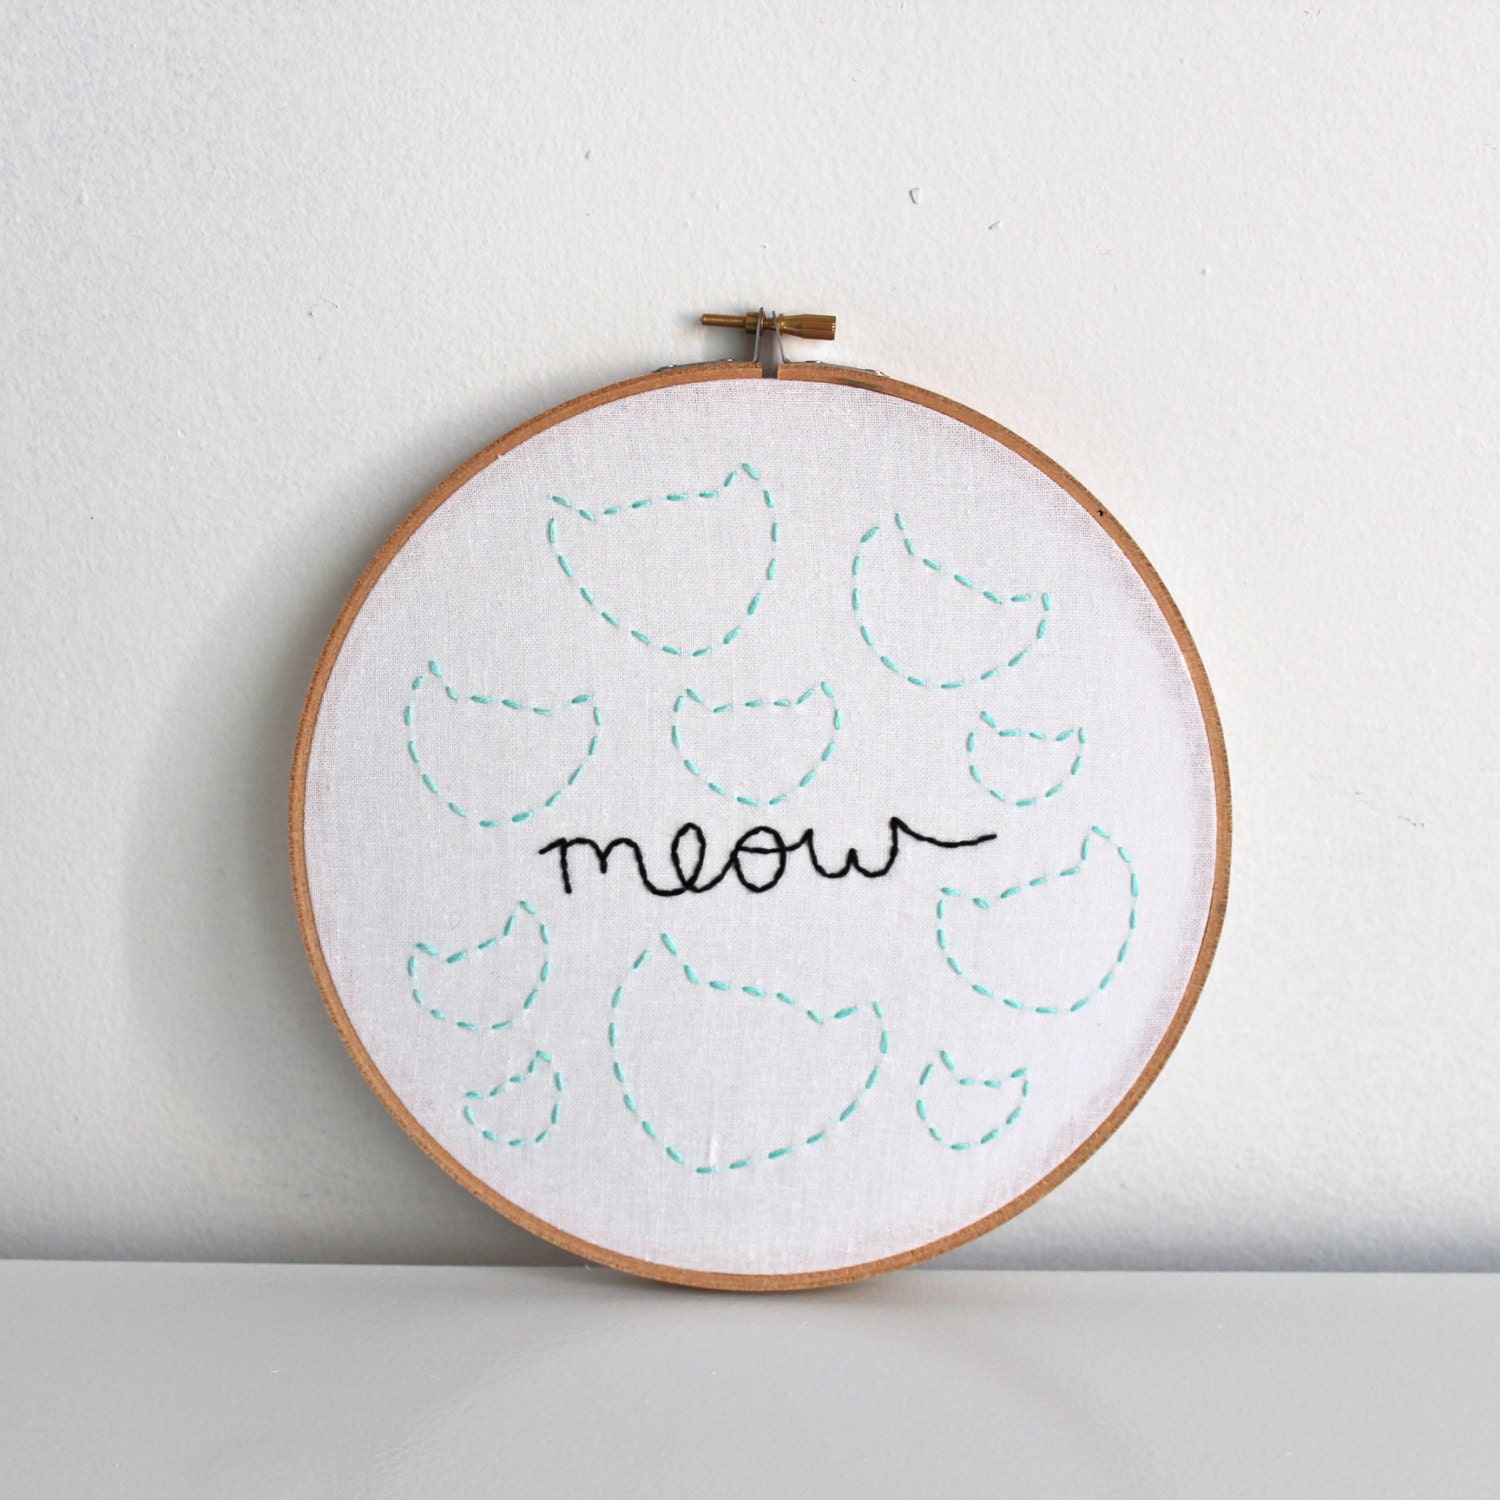 meow hand embroidered illustration in an 8 inch wooden hoop